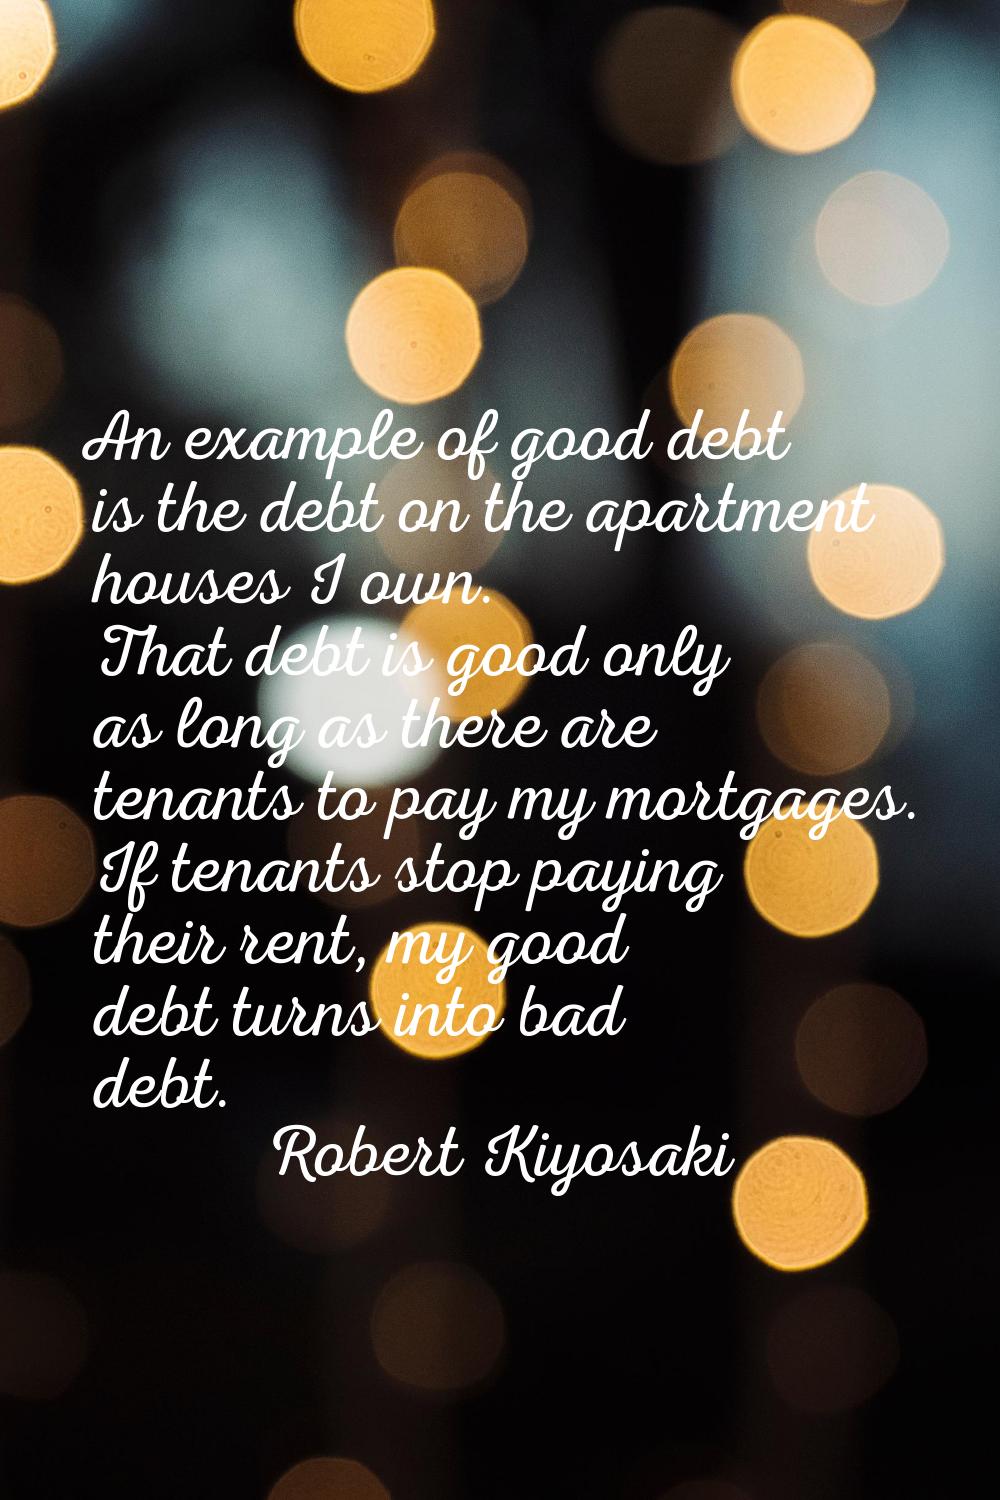 An example of good debt is the debt on the apartment houses I own. That debt is good only as long a